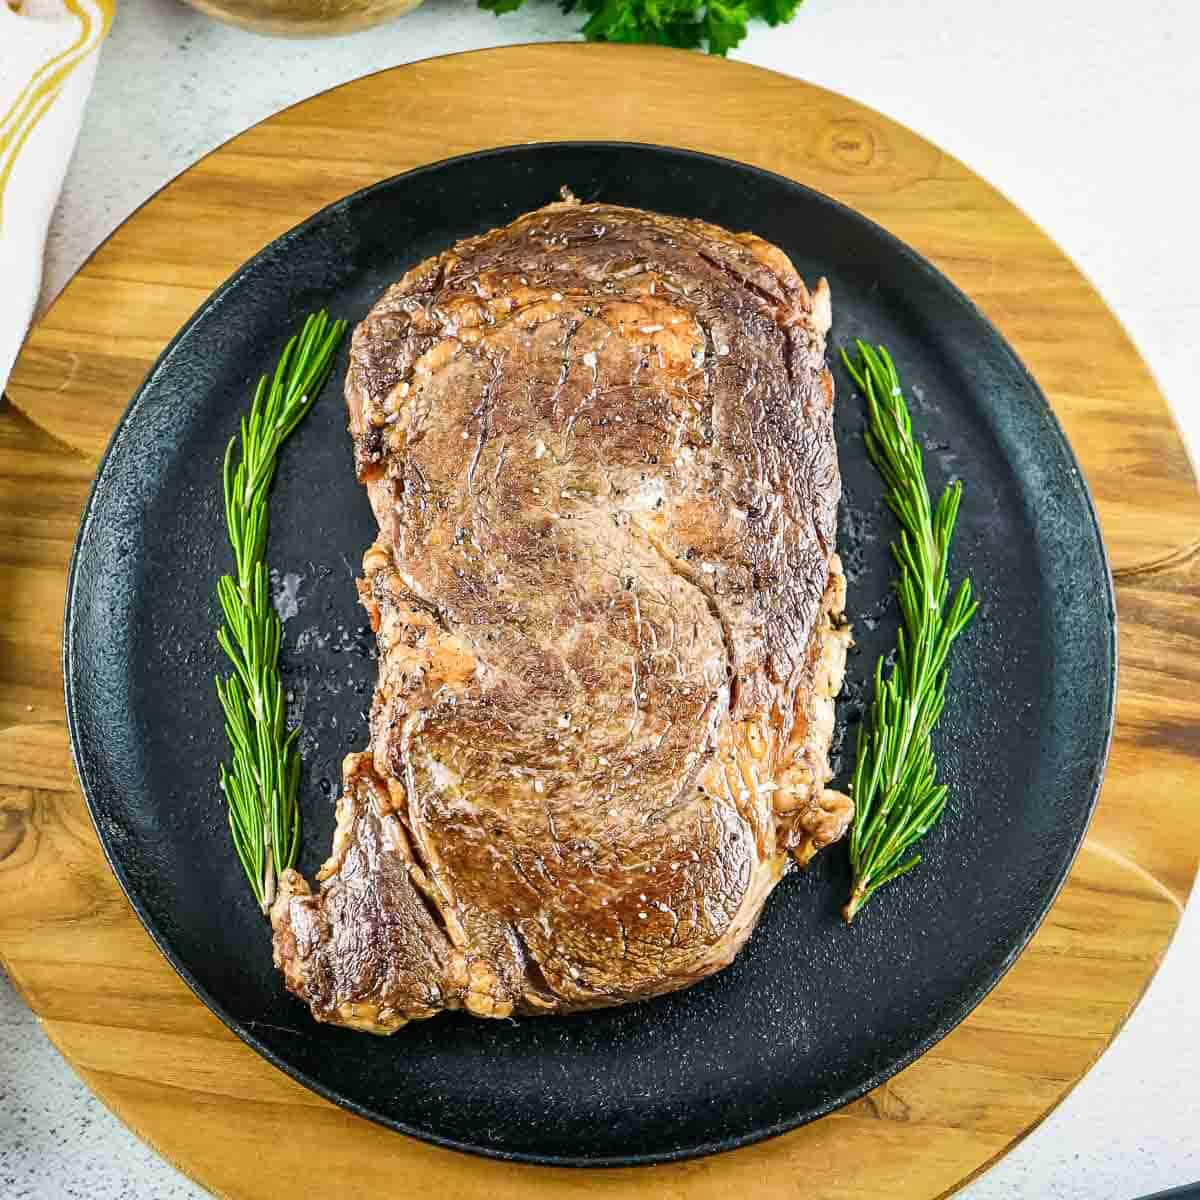 Overhead shot of whole ribeye steak with garnishes of rosemary on the side all on a black plate on a round wooden surface.